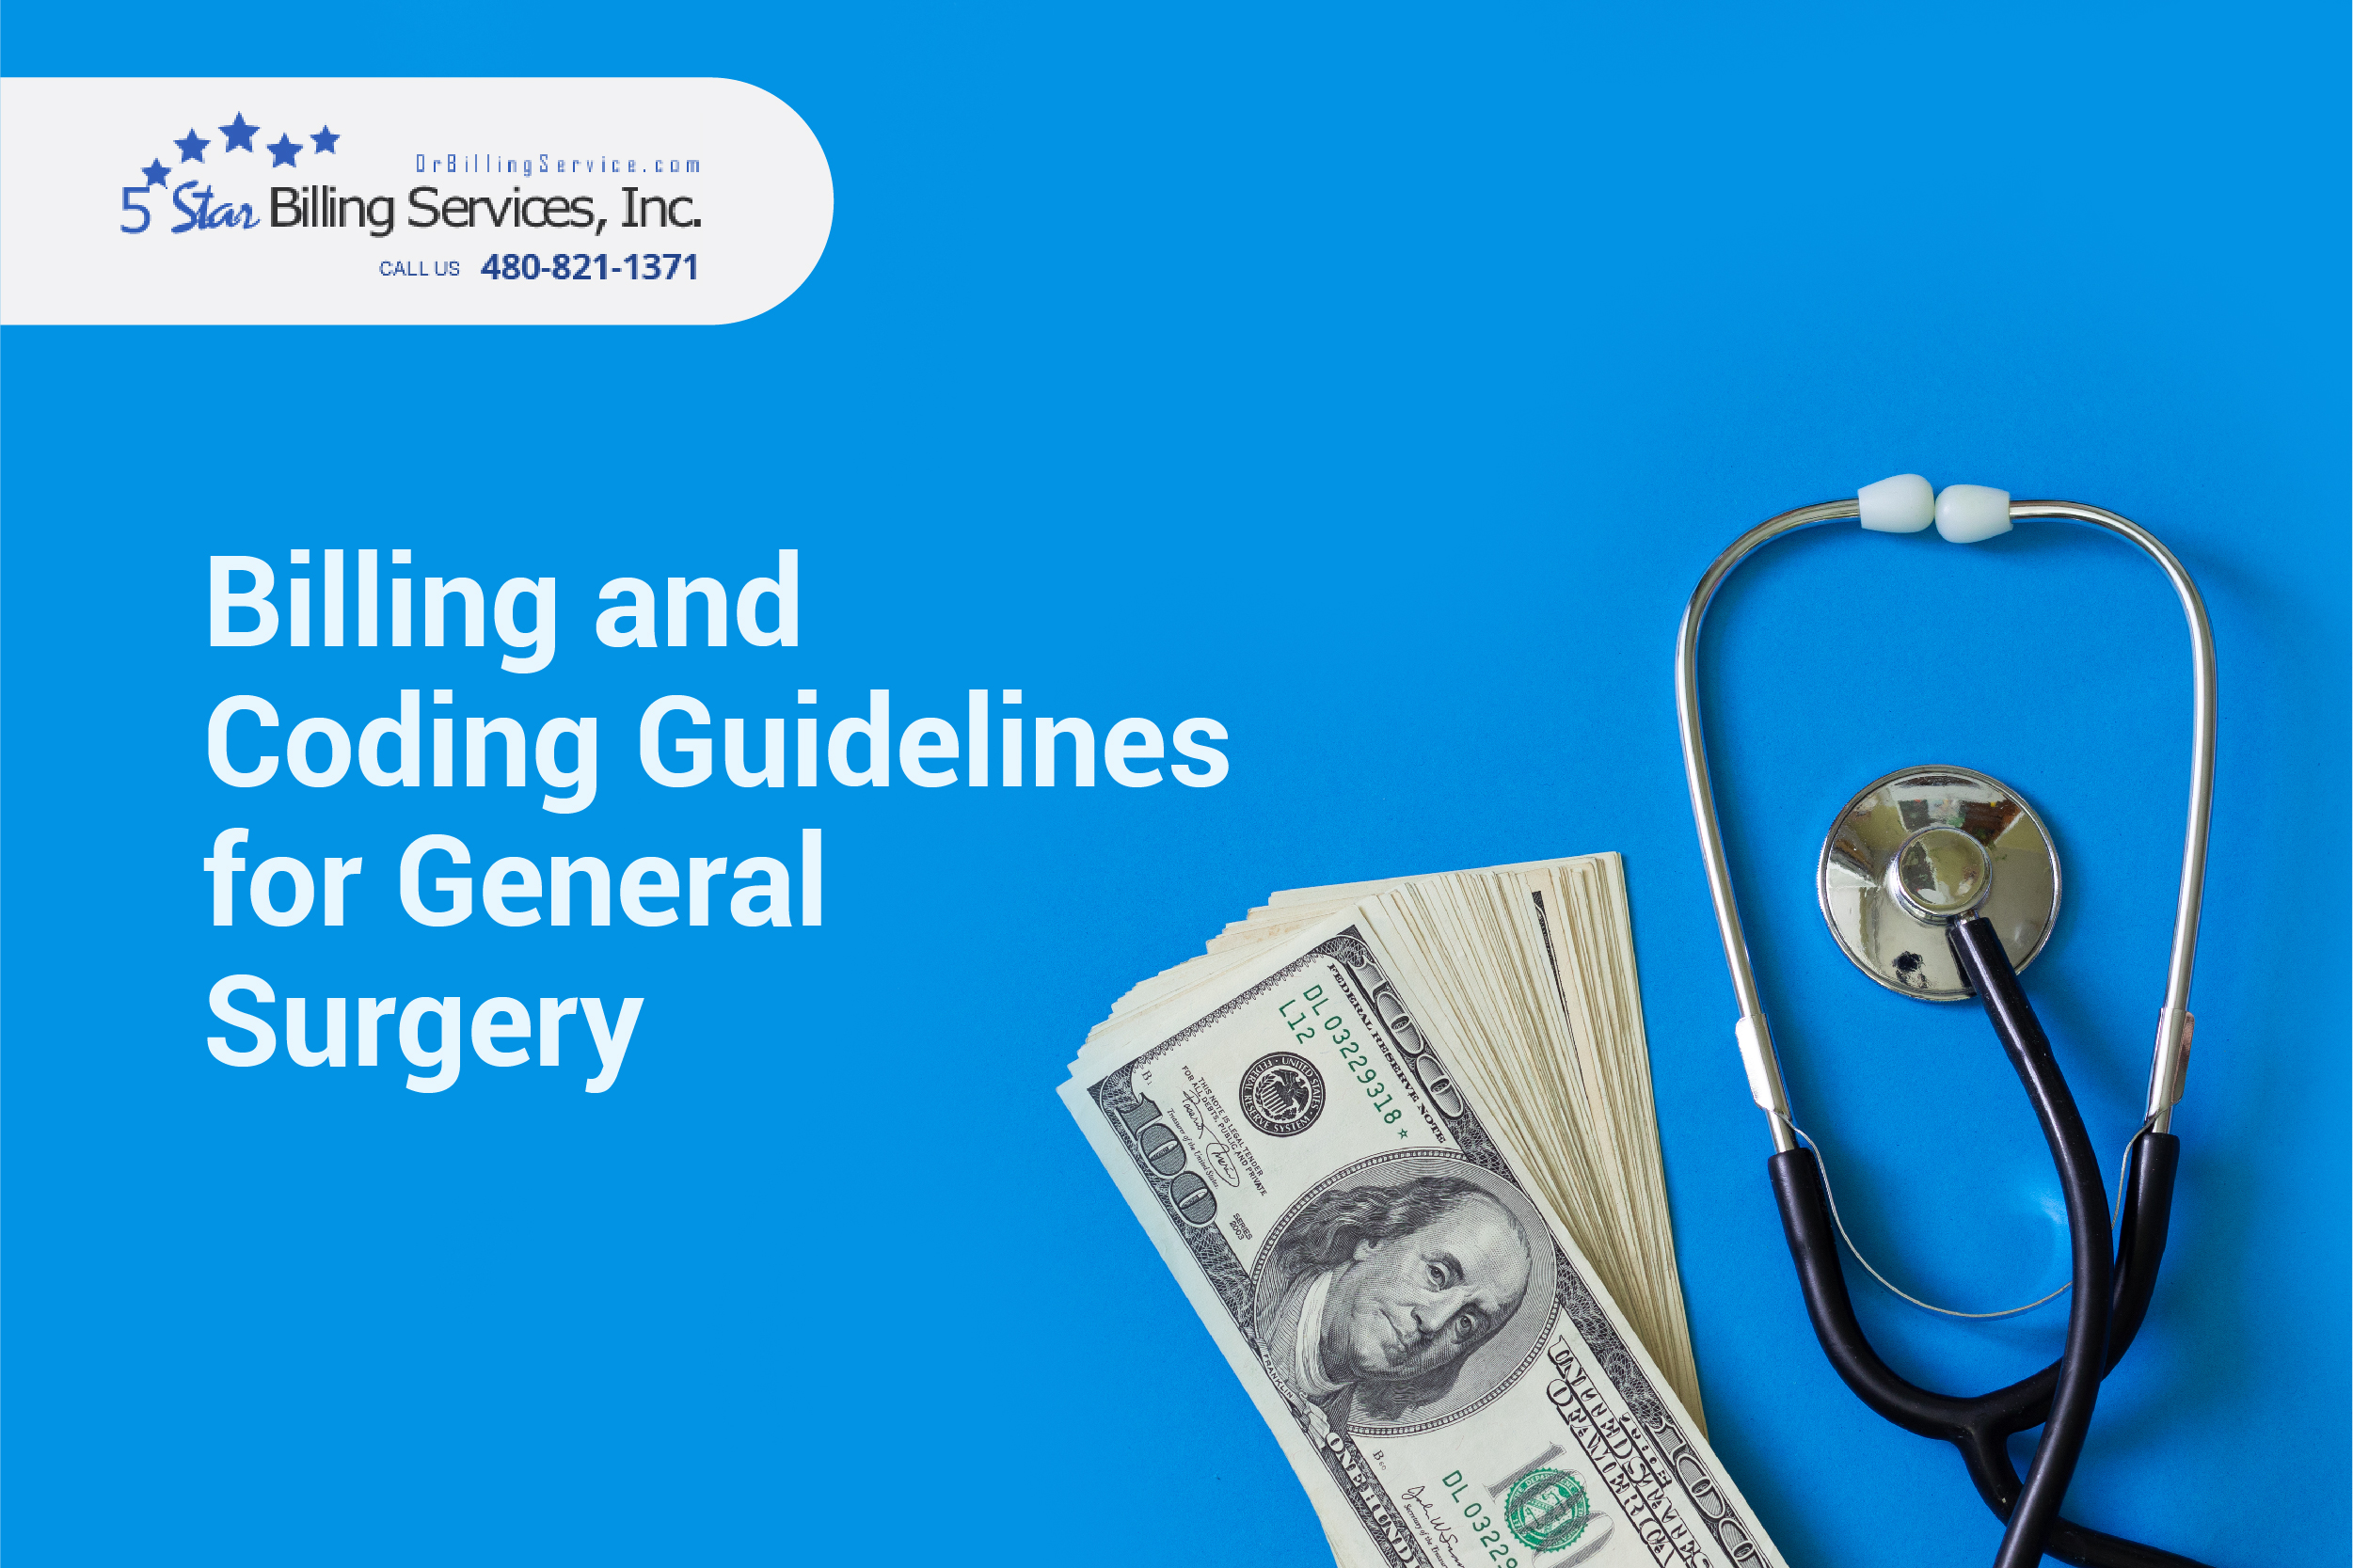 Billing and Coding guidelines for General Surgery